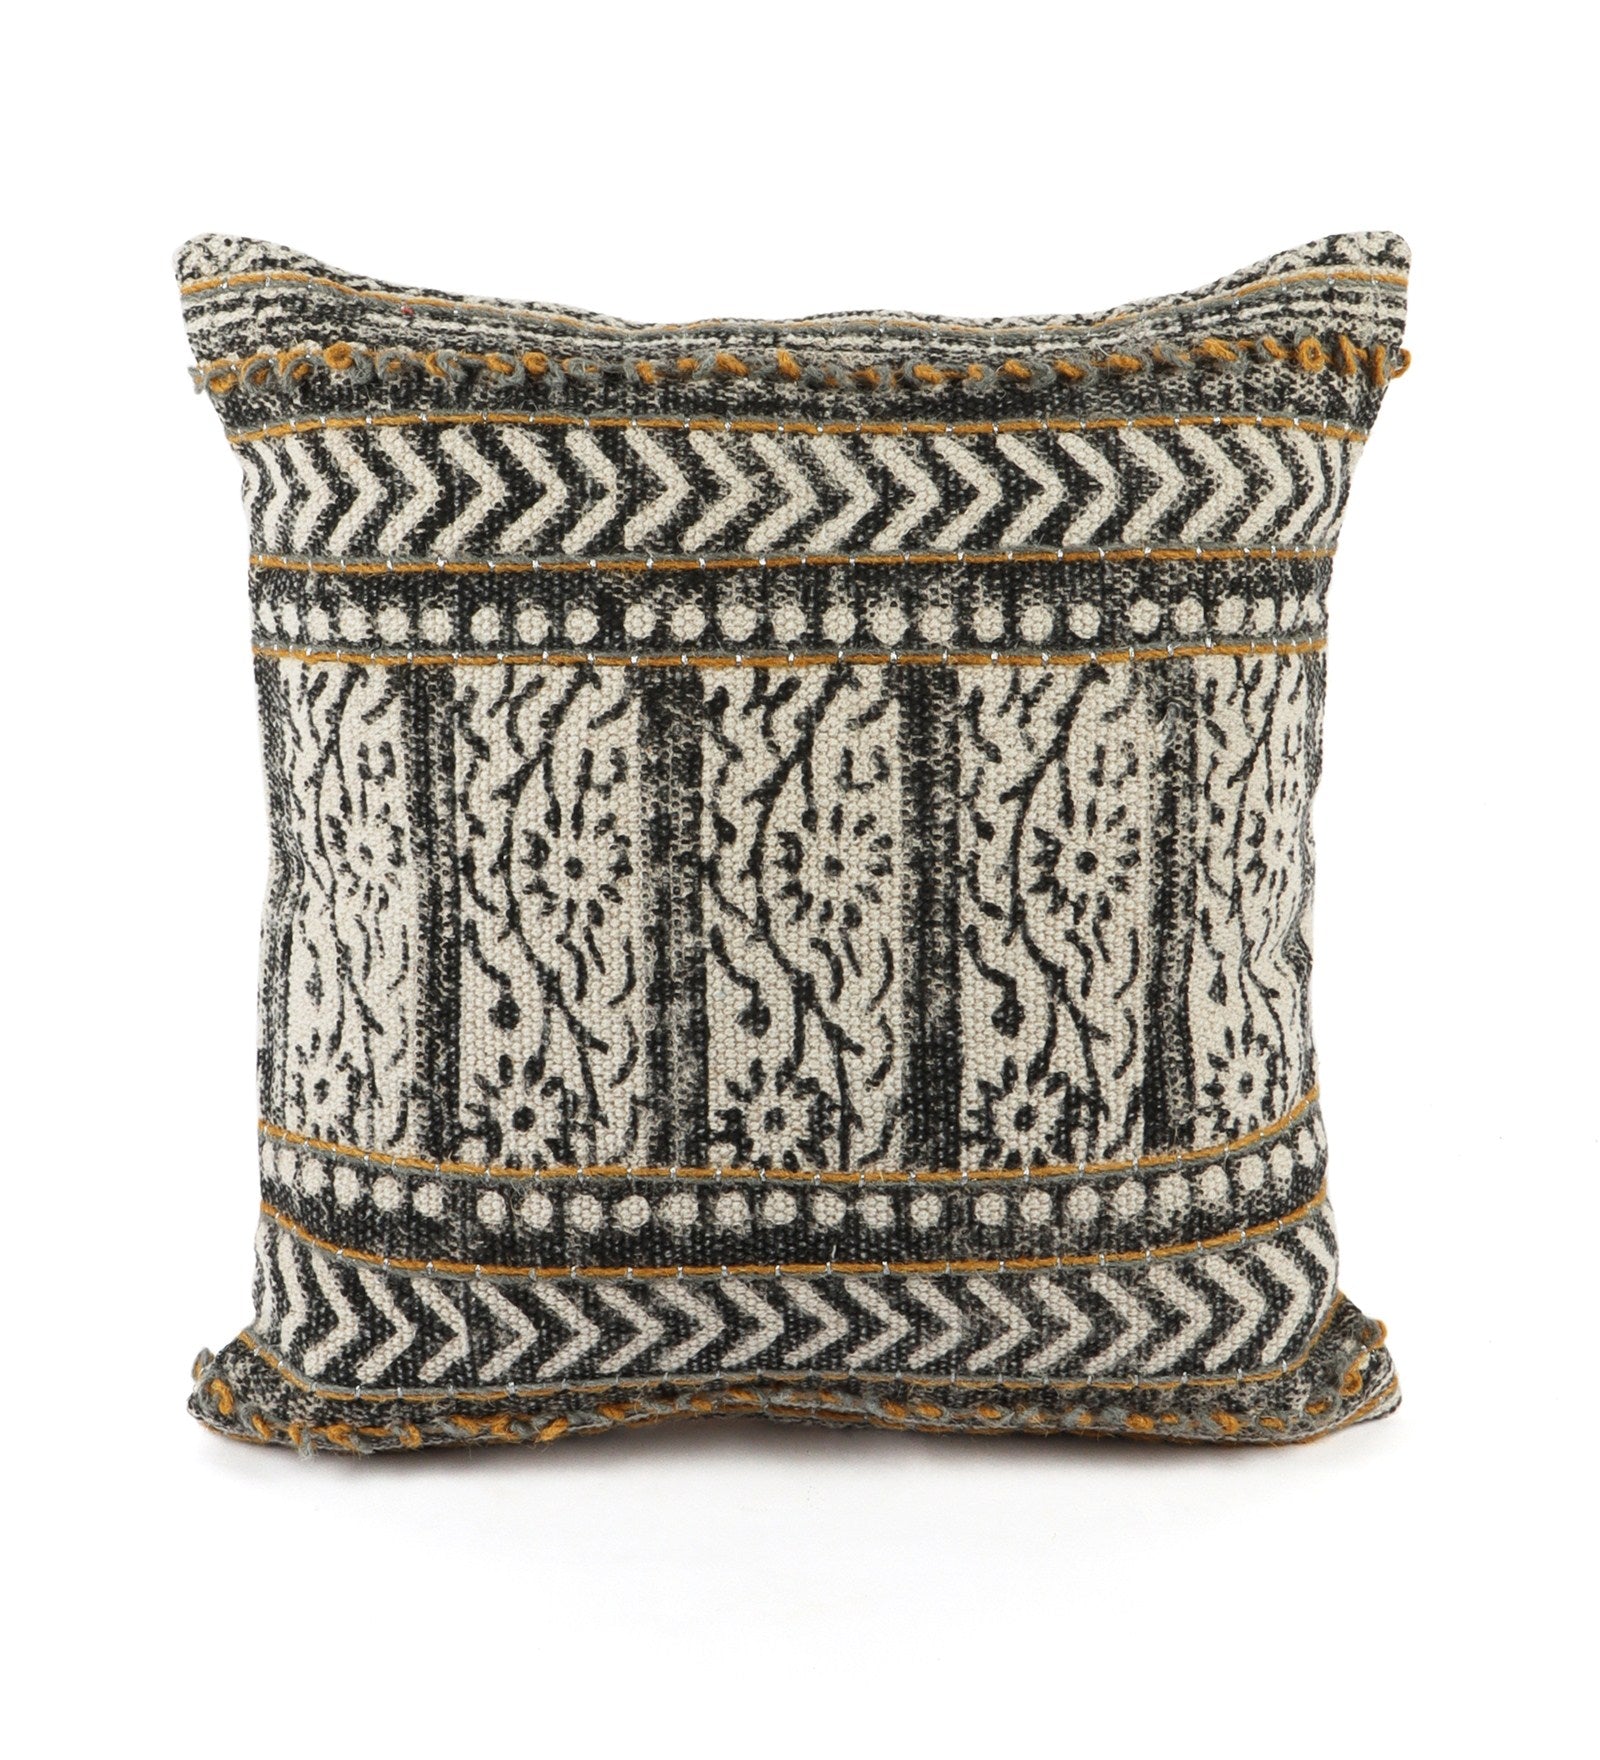 Embroidered Contemporary Cushion Cover (Black-Beige Arrow)